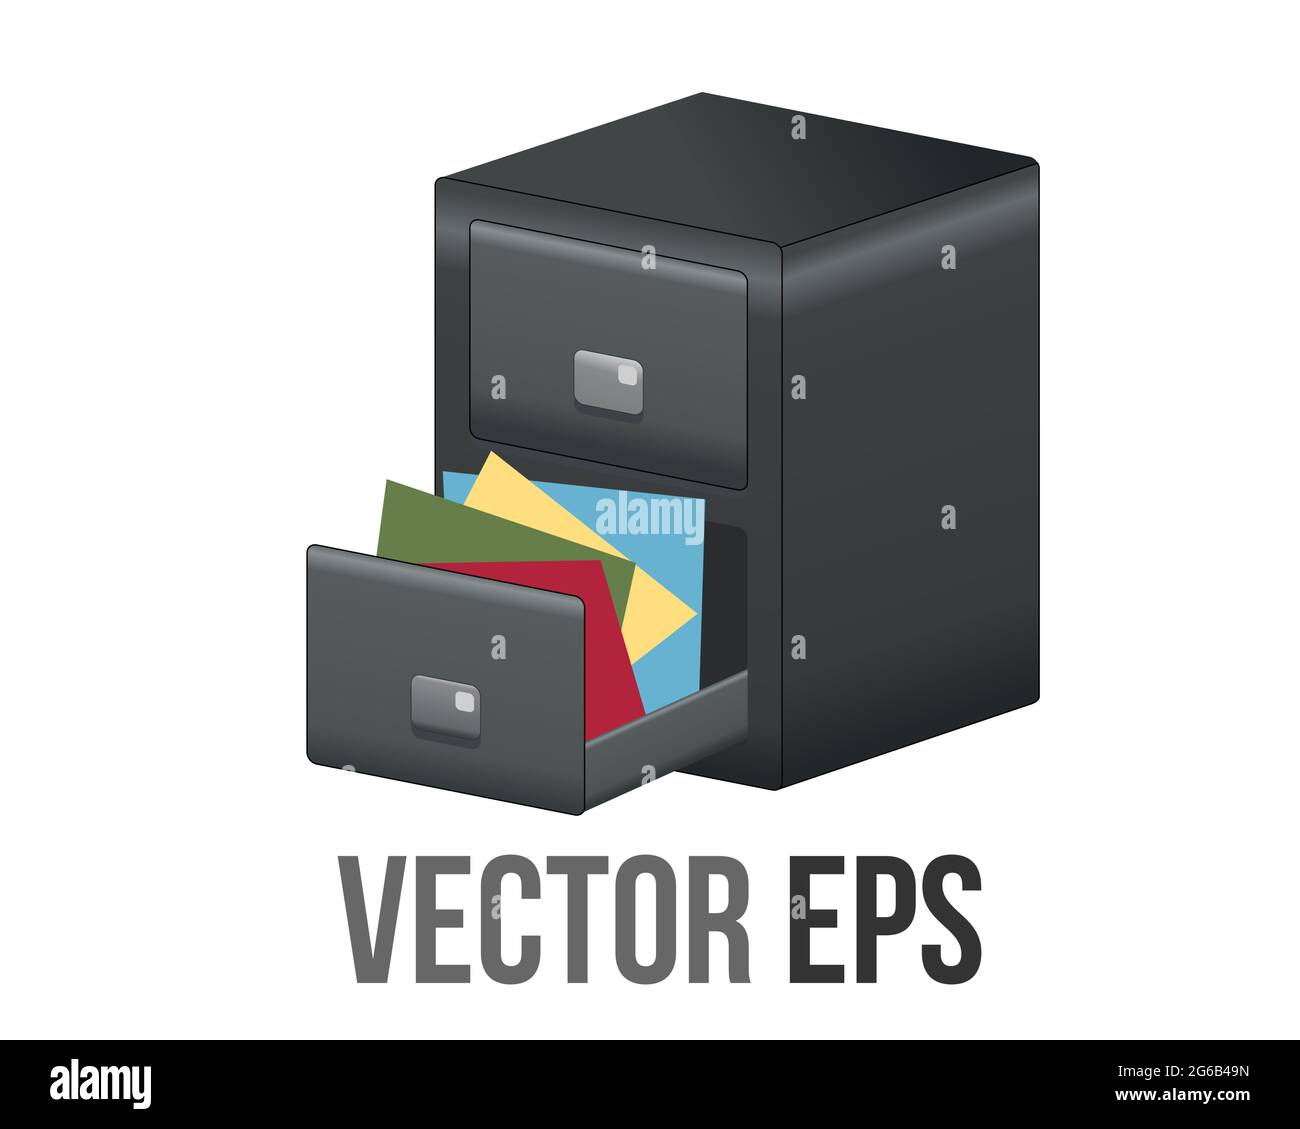 Vector classic office dark grey metal filling file cabinet icon with drawers, handles, and label holders, used to organize and store Stock Vector